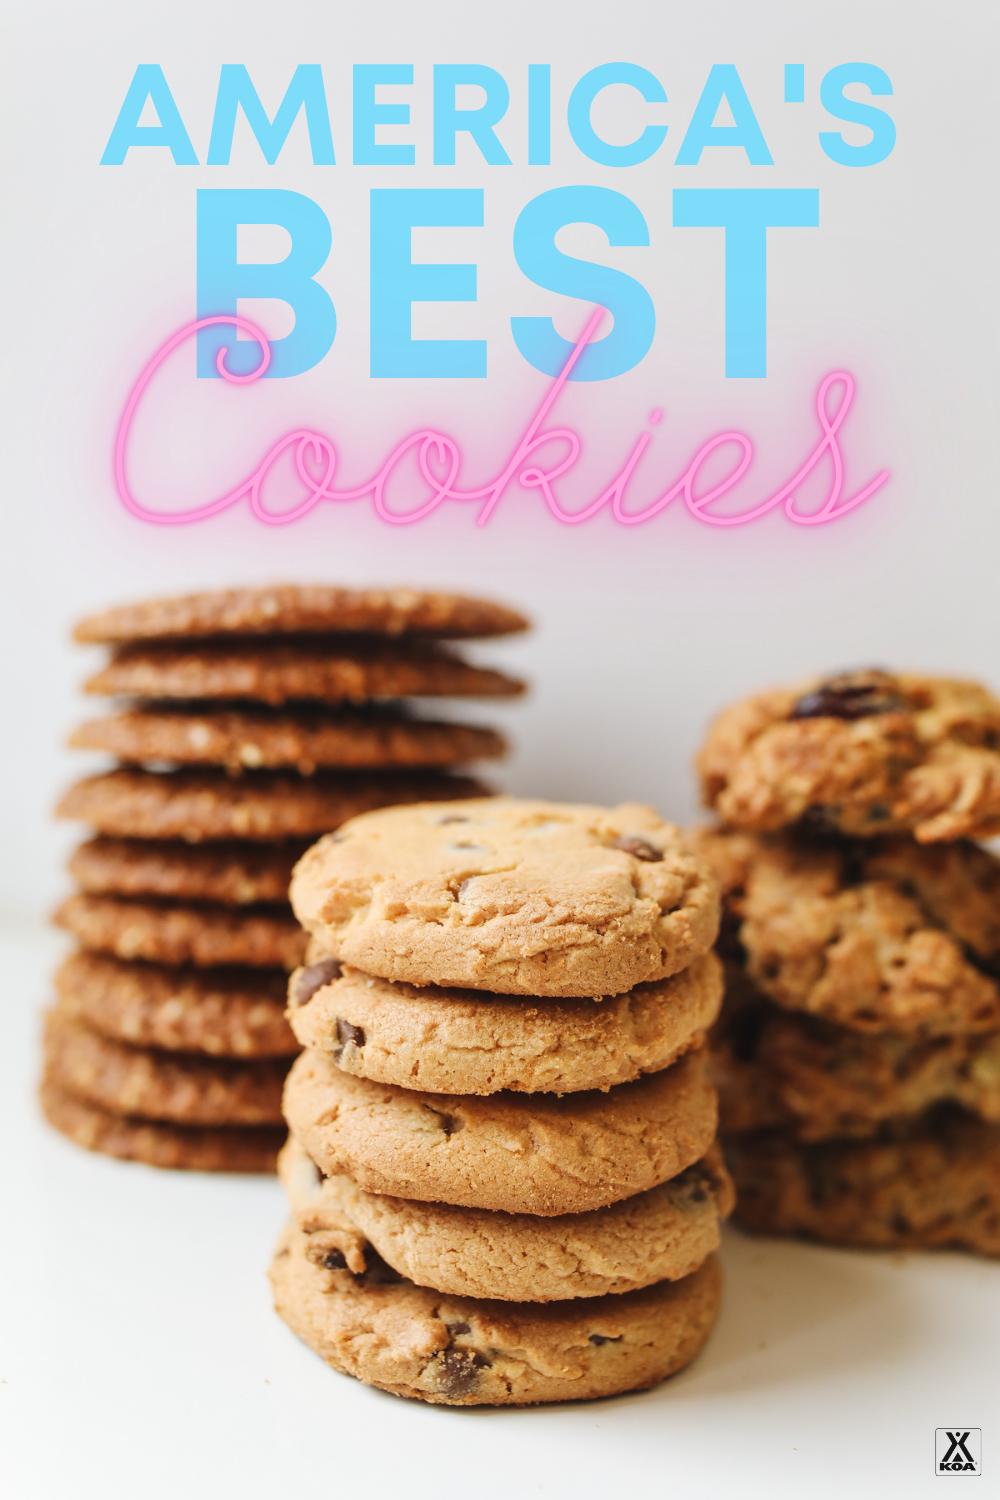 Take a road trip for a cookie (or a dozen)? You bet! With cookies this good you'll be hitting the road and trying these road trip worthy cookie stops before you know it. These are our favorite cookie bakeries.